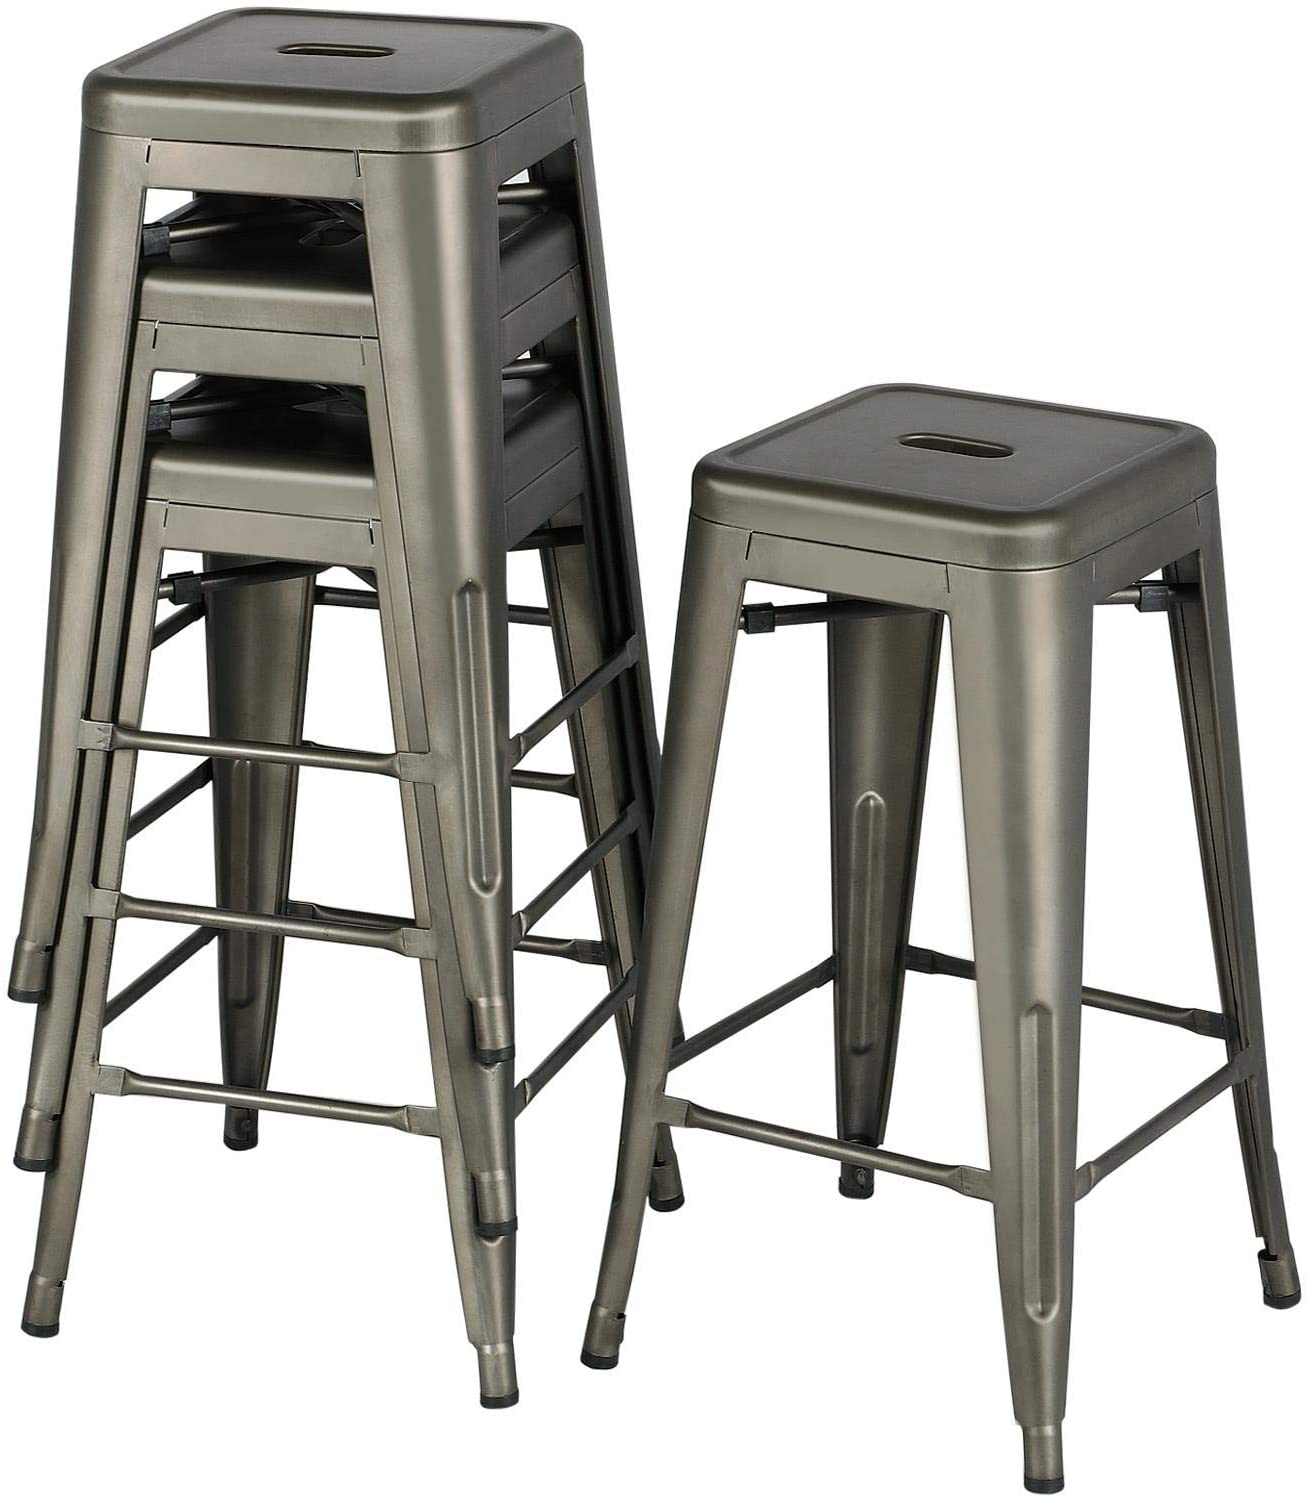 BAR STOOLS 30 inches - Pack of 4